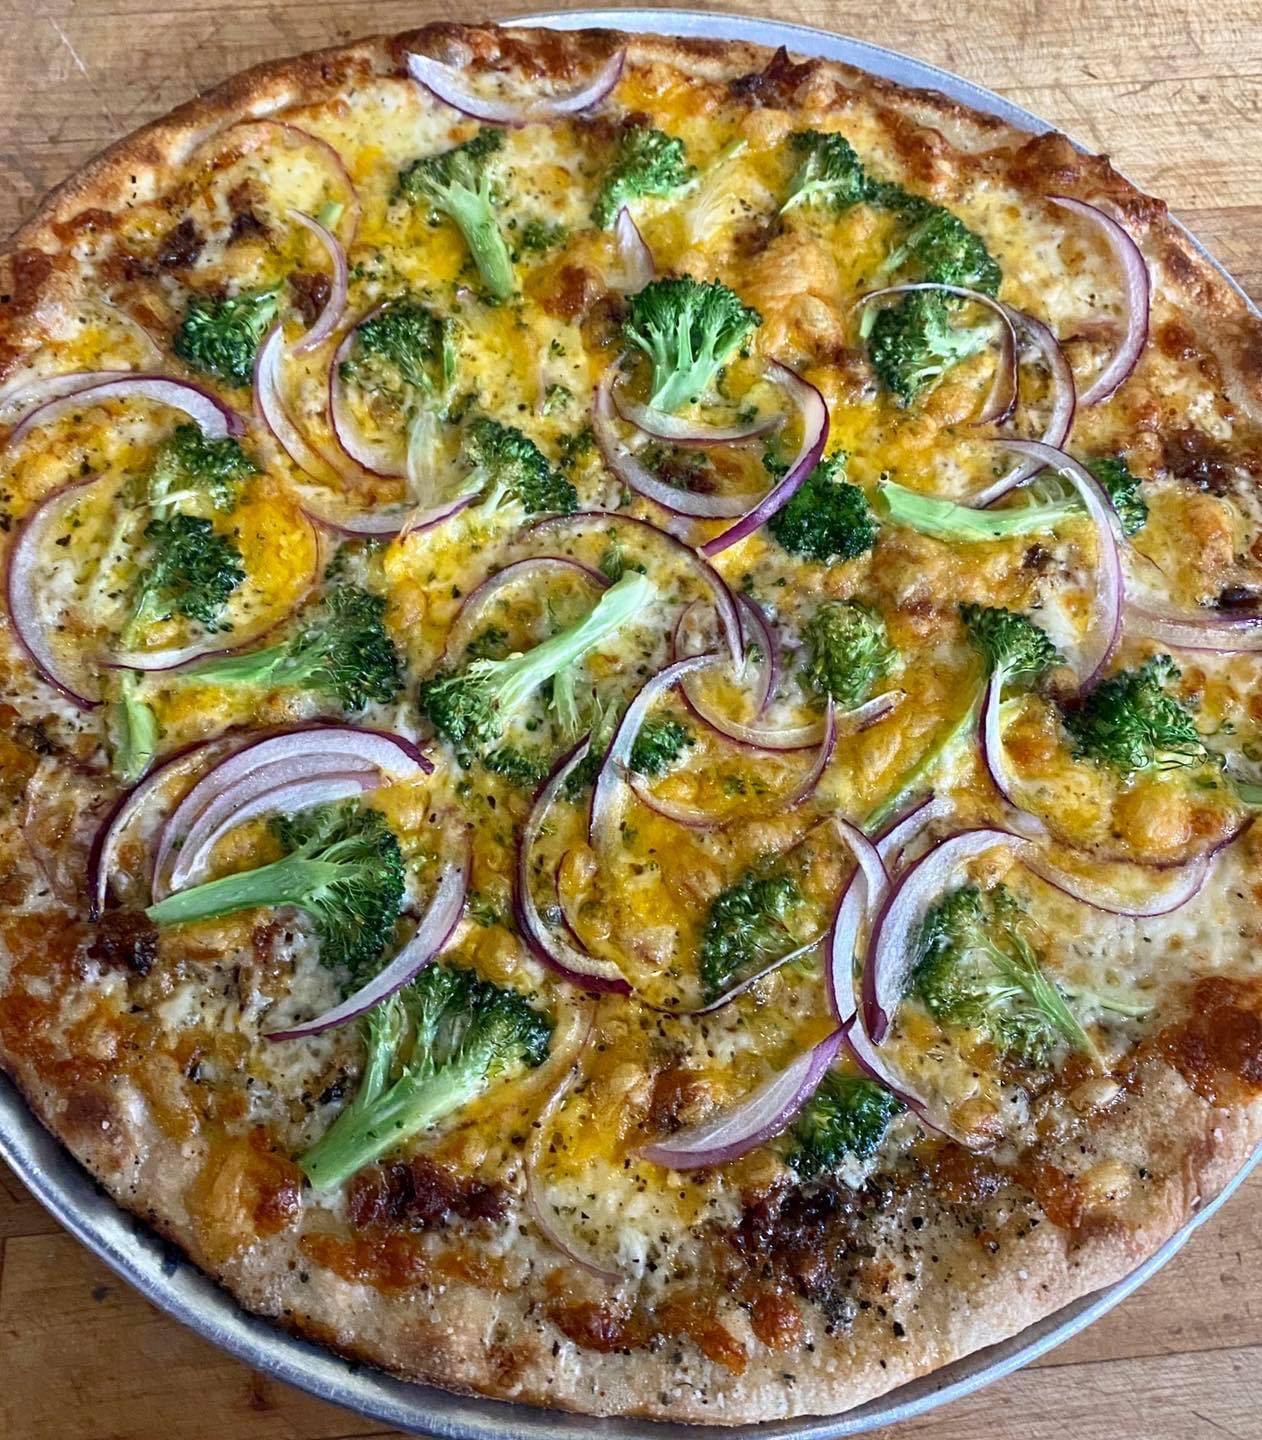 One of the specialty pizza's from The Slab (courtesy photo).